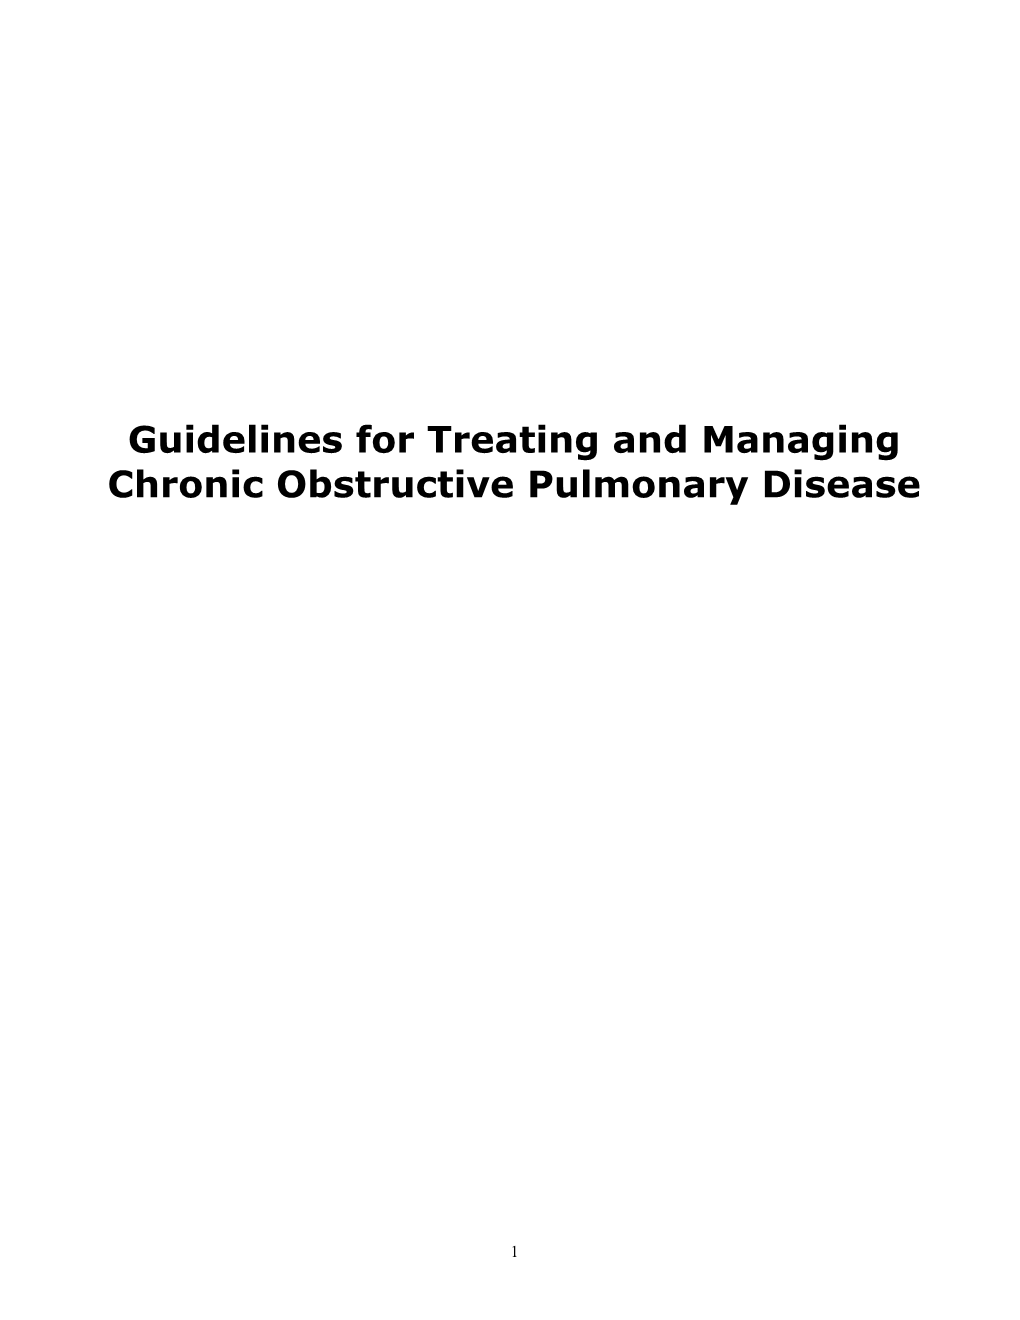 Guidelines for Treating and Managing Chronic Obstructive Pulmonary Disease